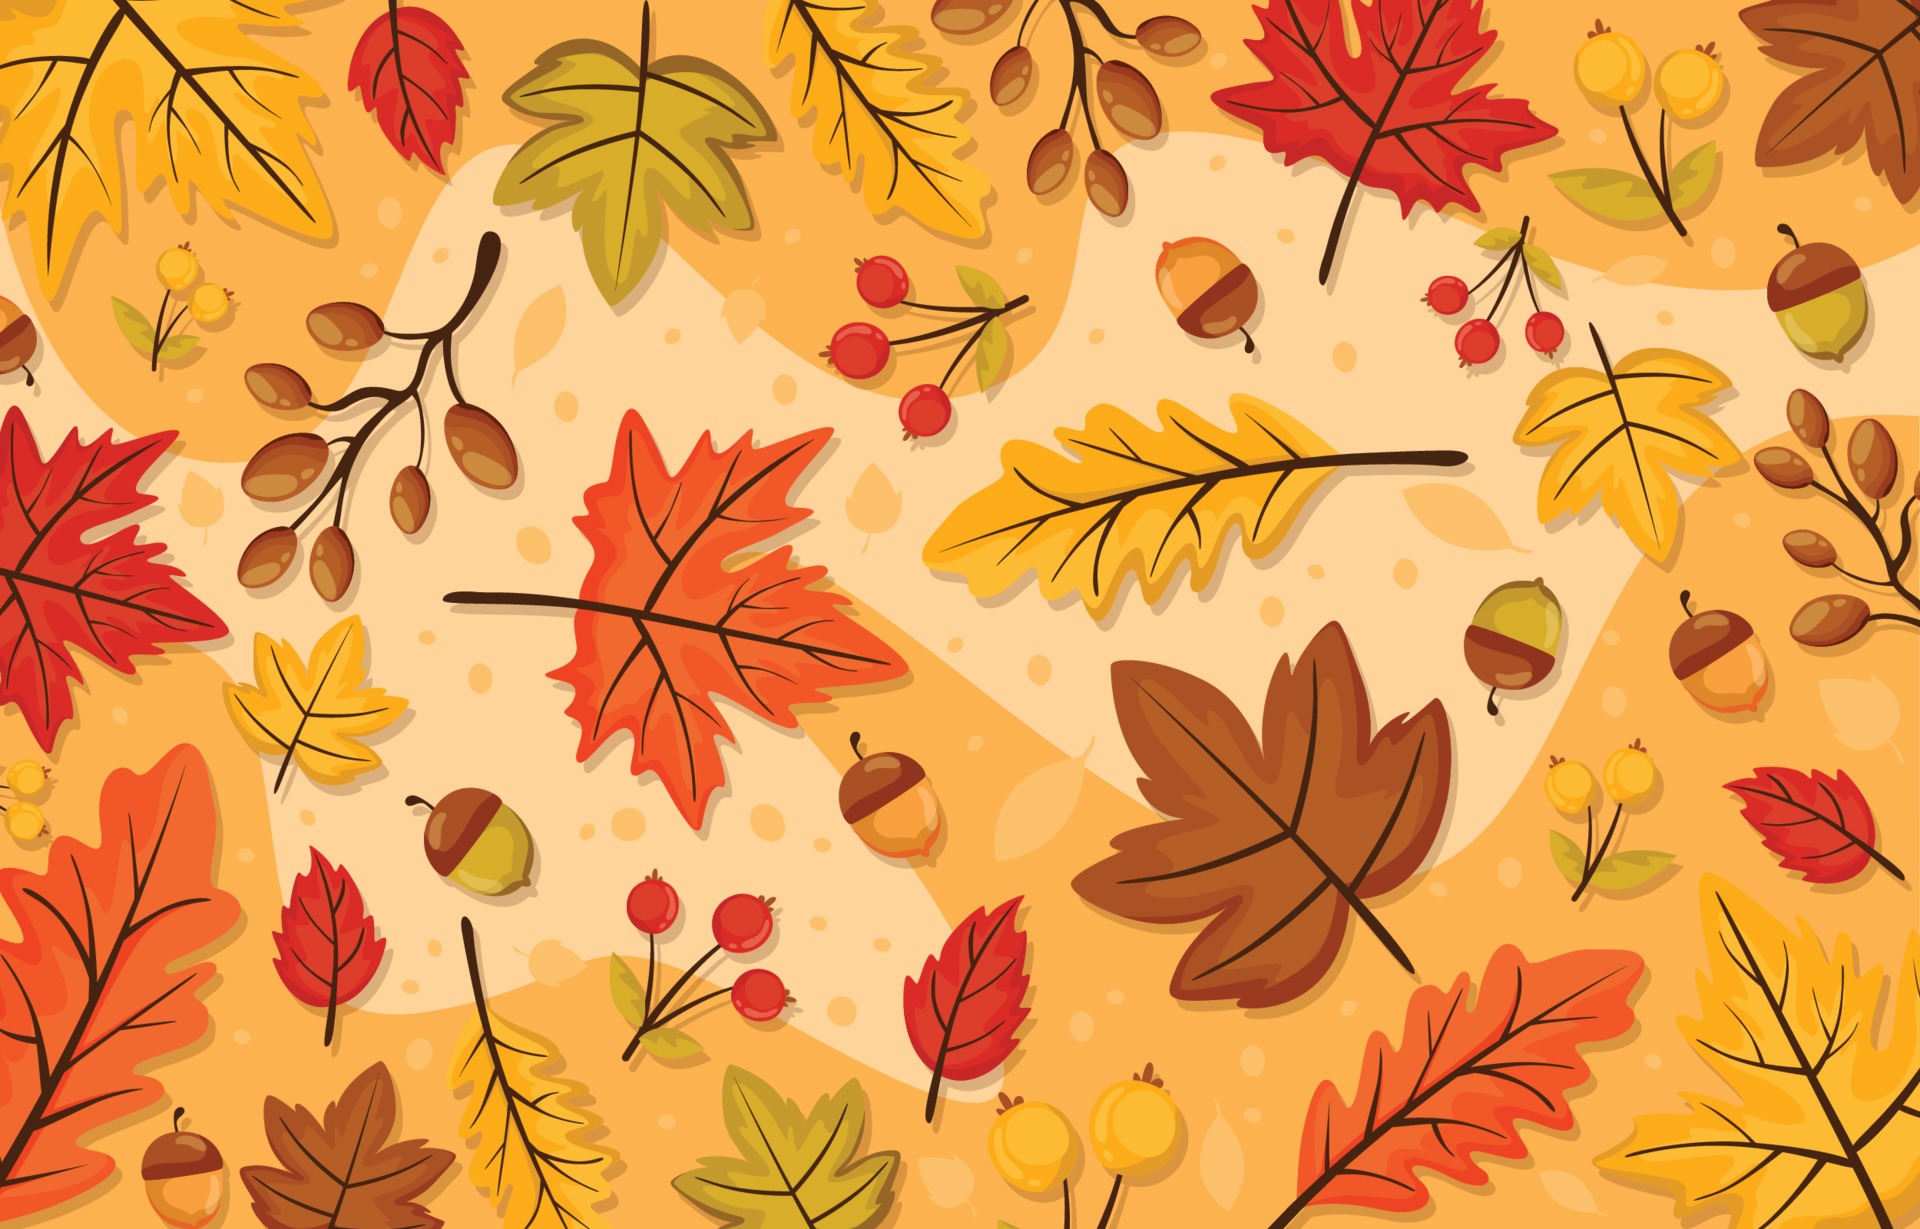 Details 100 fall leaves background